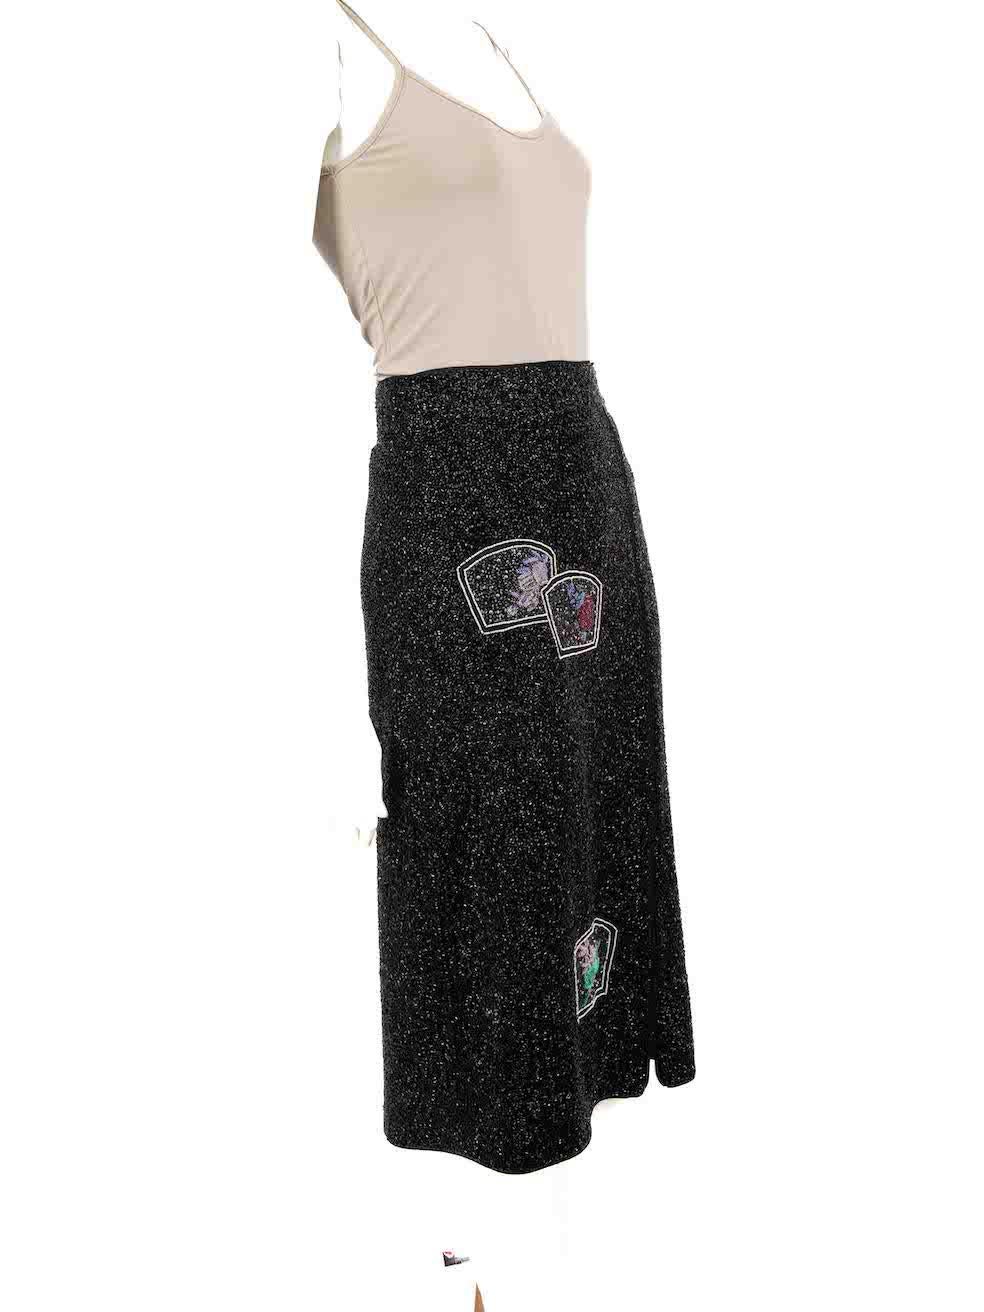 CONDITION is Never worn, with tags. No visible wear to skirt is evident on this new Ganni designer resale item.
 
 Details
 Black
 Polyester
 Pencil skirt
 Beaded
 Beaded patch detail
 Midi
 Side zip fastening
 
 
 Made in India
 
 Composition
 100%